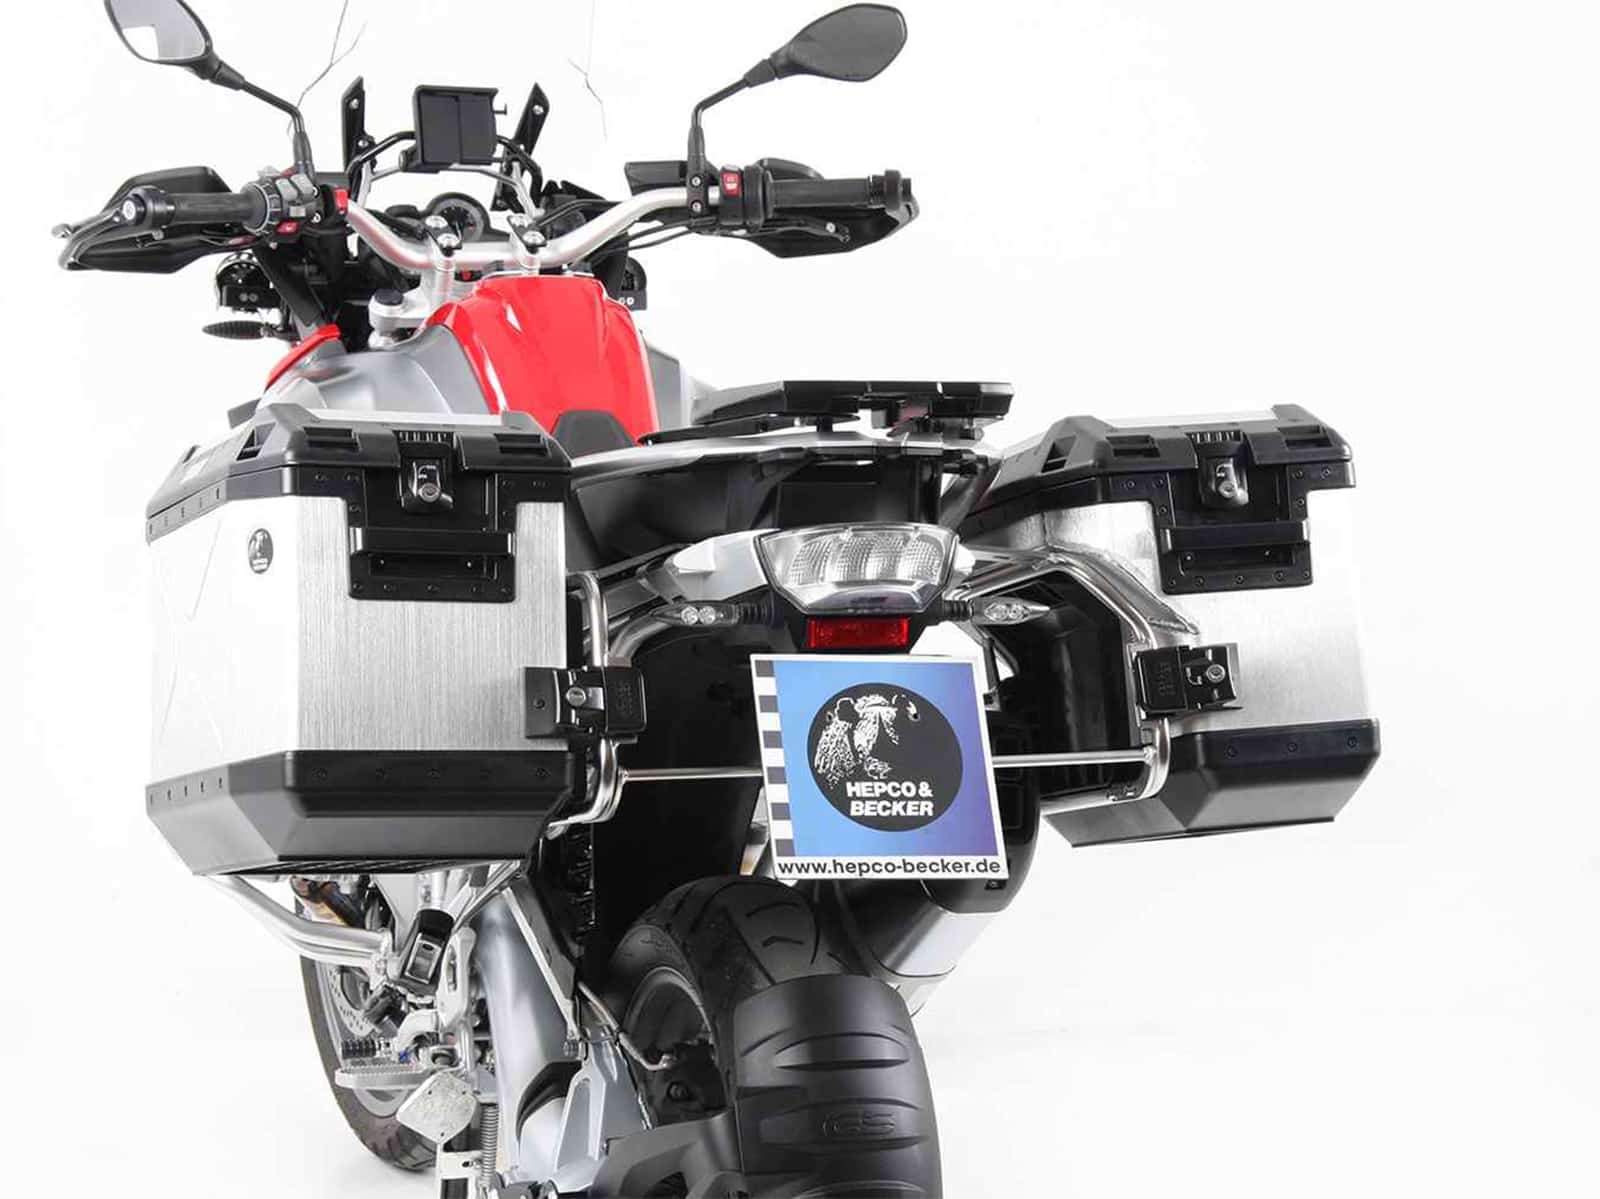 Hepco&Becker Accessories for BMW R 1200 GS LC (2017-)